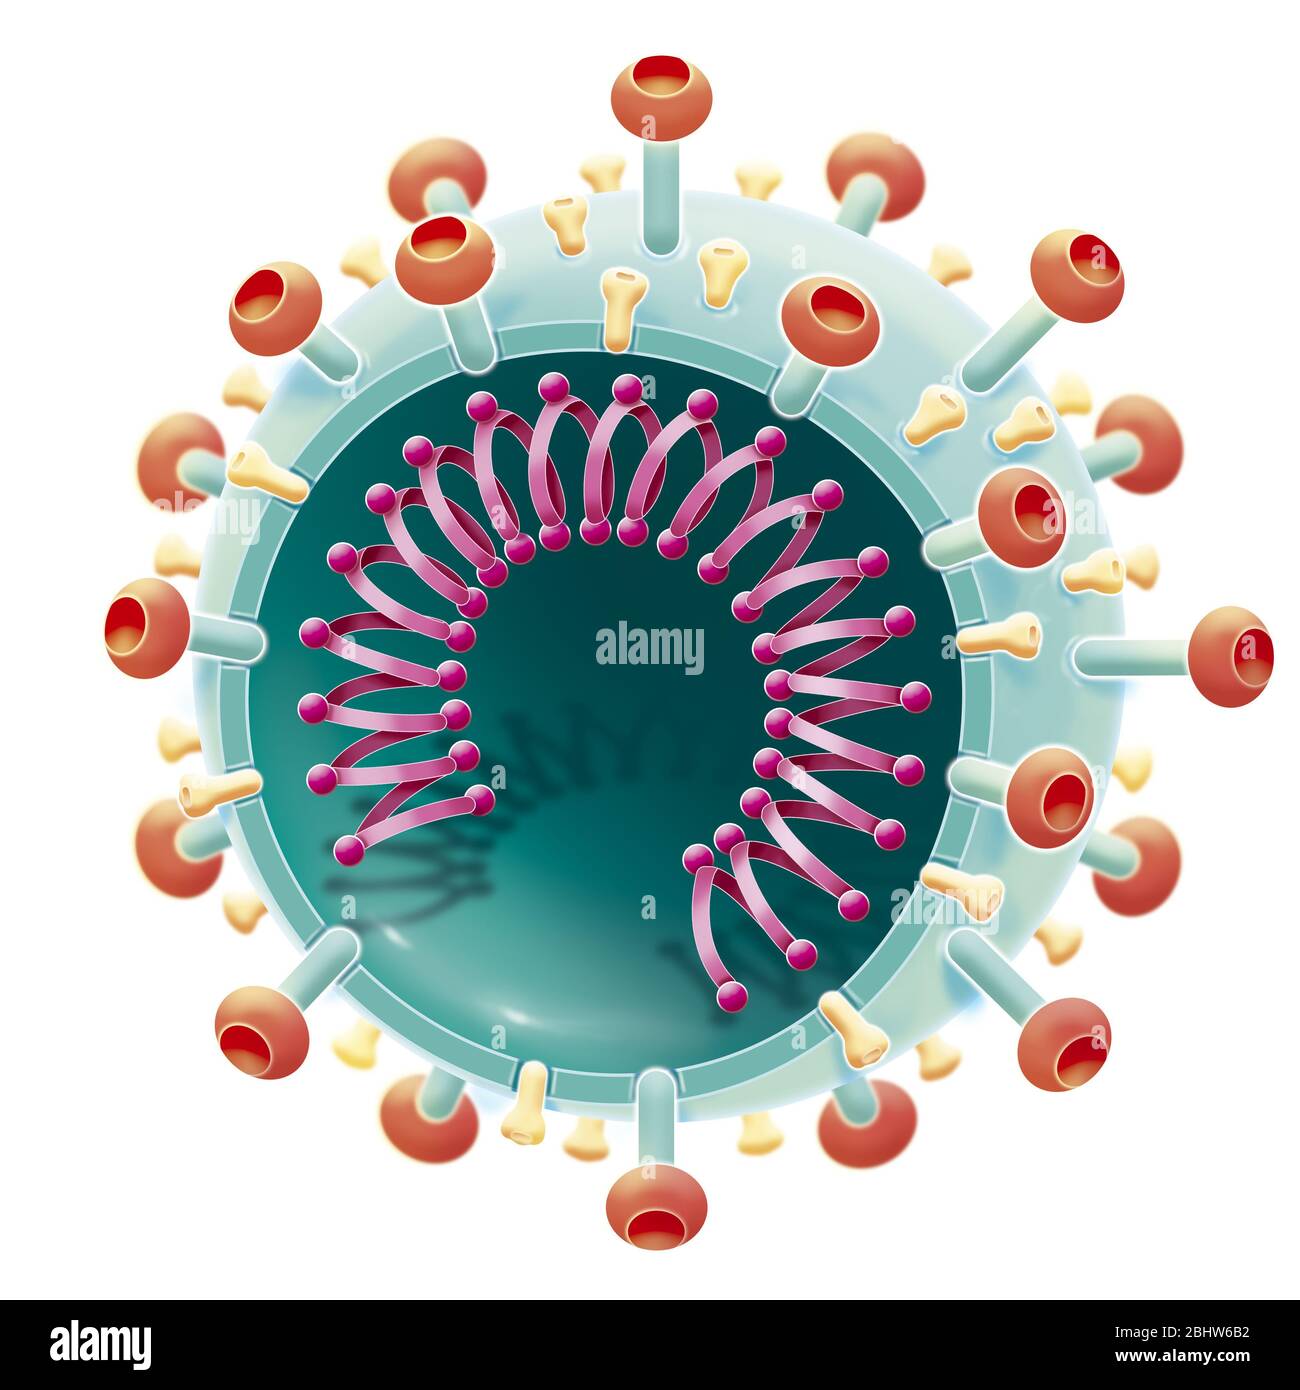 Coronavirus, SARS-COV2, pandemic 2020. The coronavirus which rages in 2020 is called SARS-COV2. This virus is made up of viral proteins. The one with Stock Photo